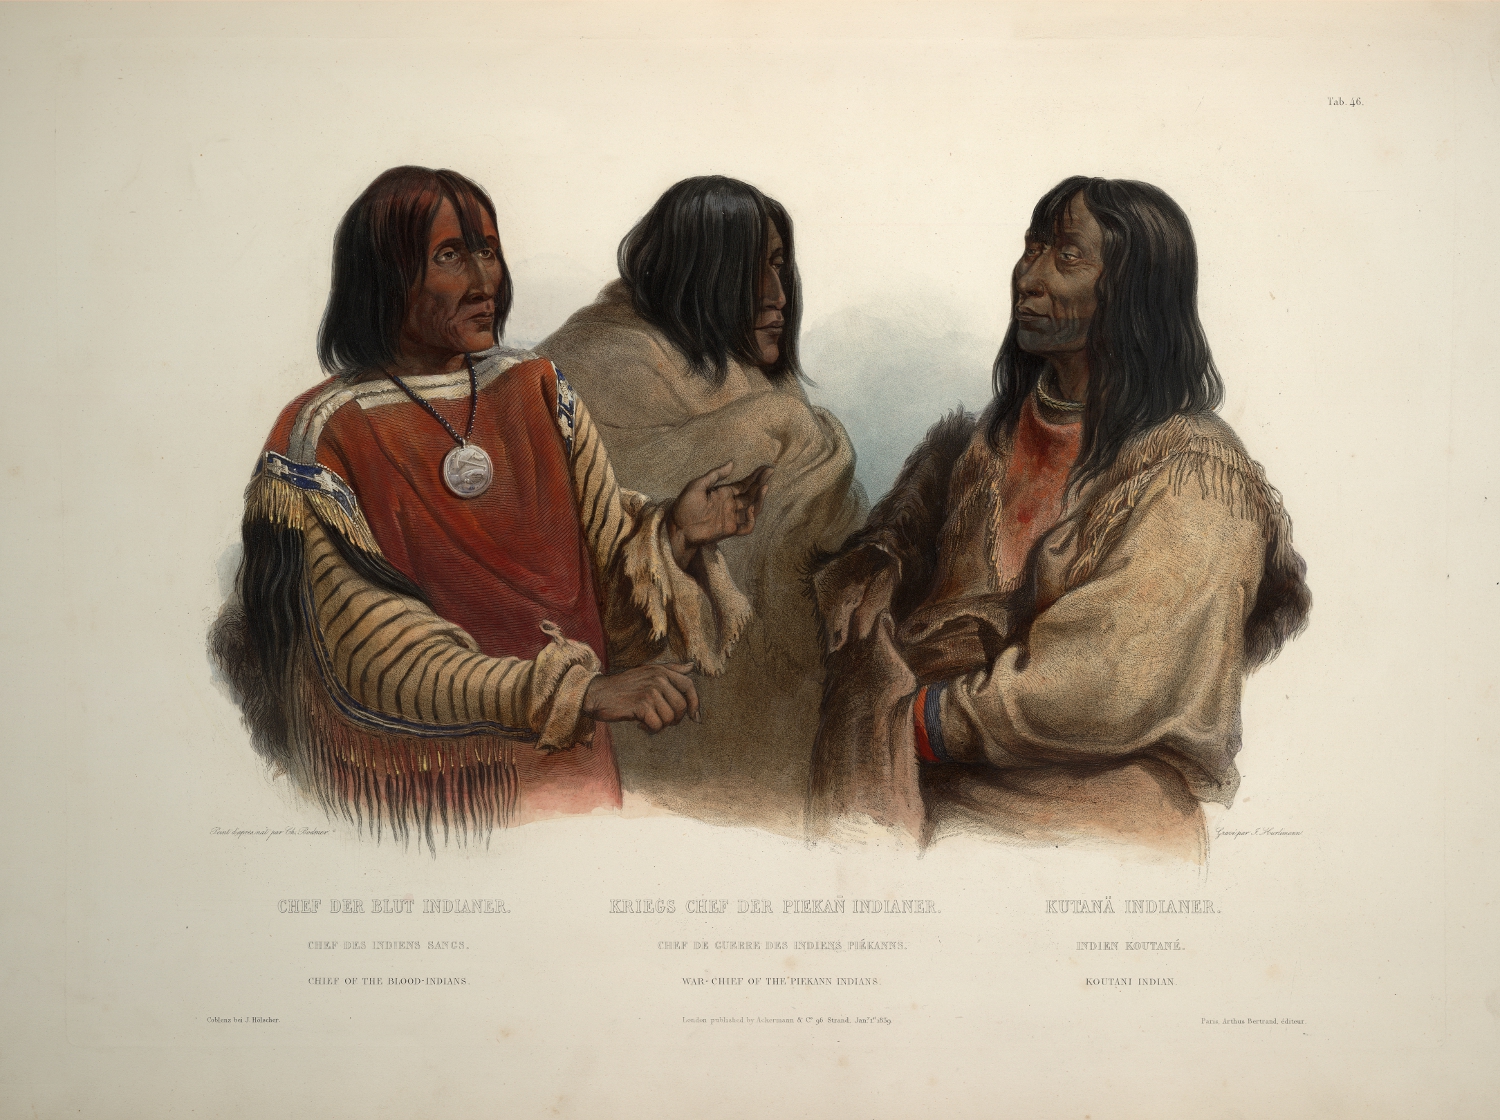 1809-1893 Karl Bo... - 1839 Karl Bodmer 79 - Chief Of The Blood-Indians ... War Chief Of The Piekann Indians Koutani Indian.jpg